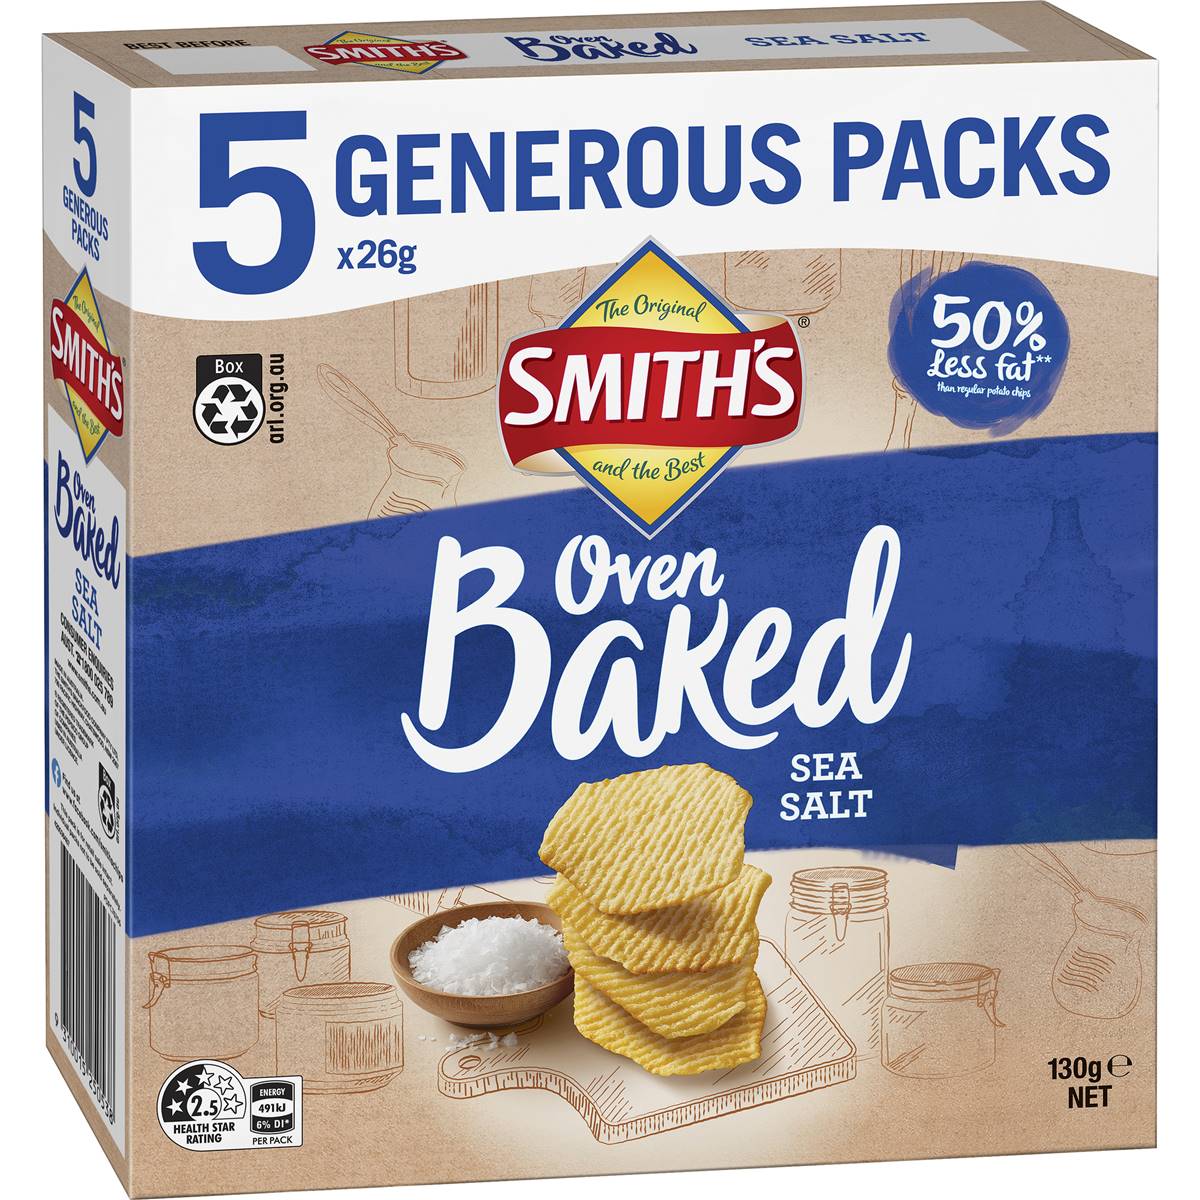 Calories in Smith's Oven Baked Chips Multipack Sea Salt